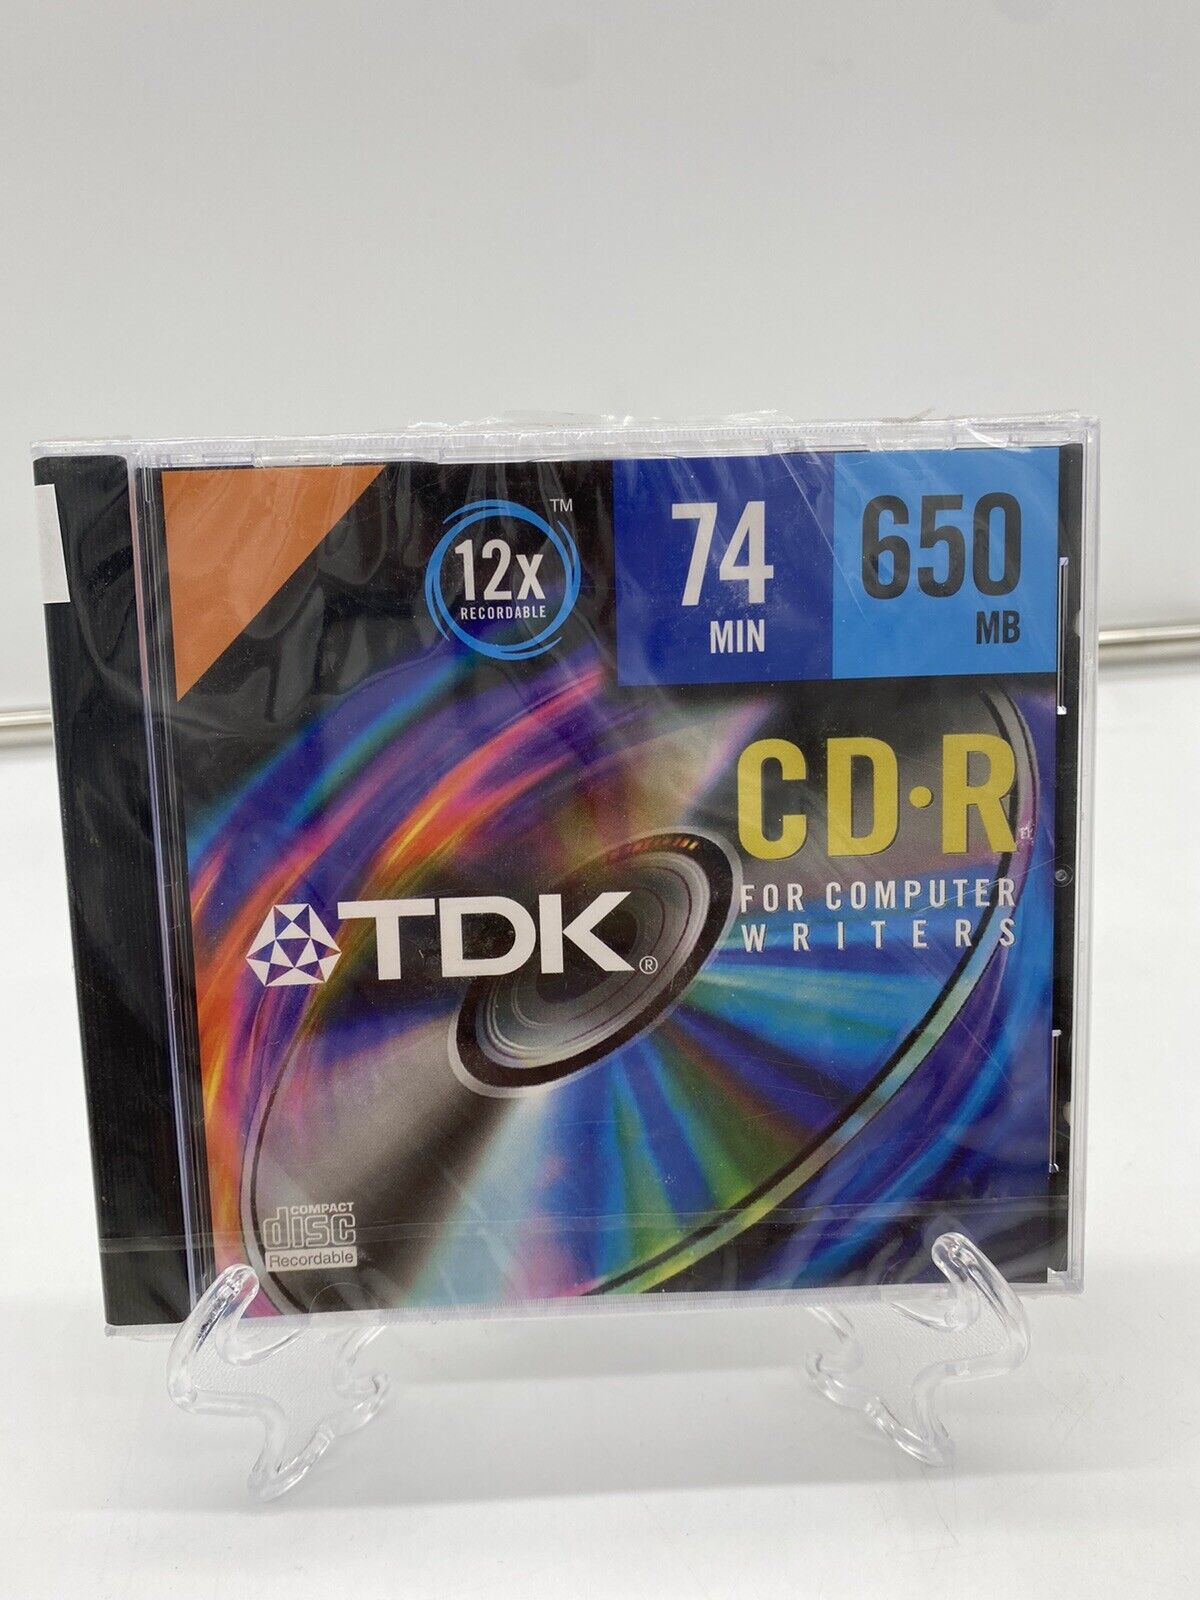 TDK CD-R74MGAX CD-R, 74 Minute, 650 MB (Single with Jewel Case) (Dis - Brand New